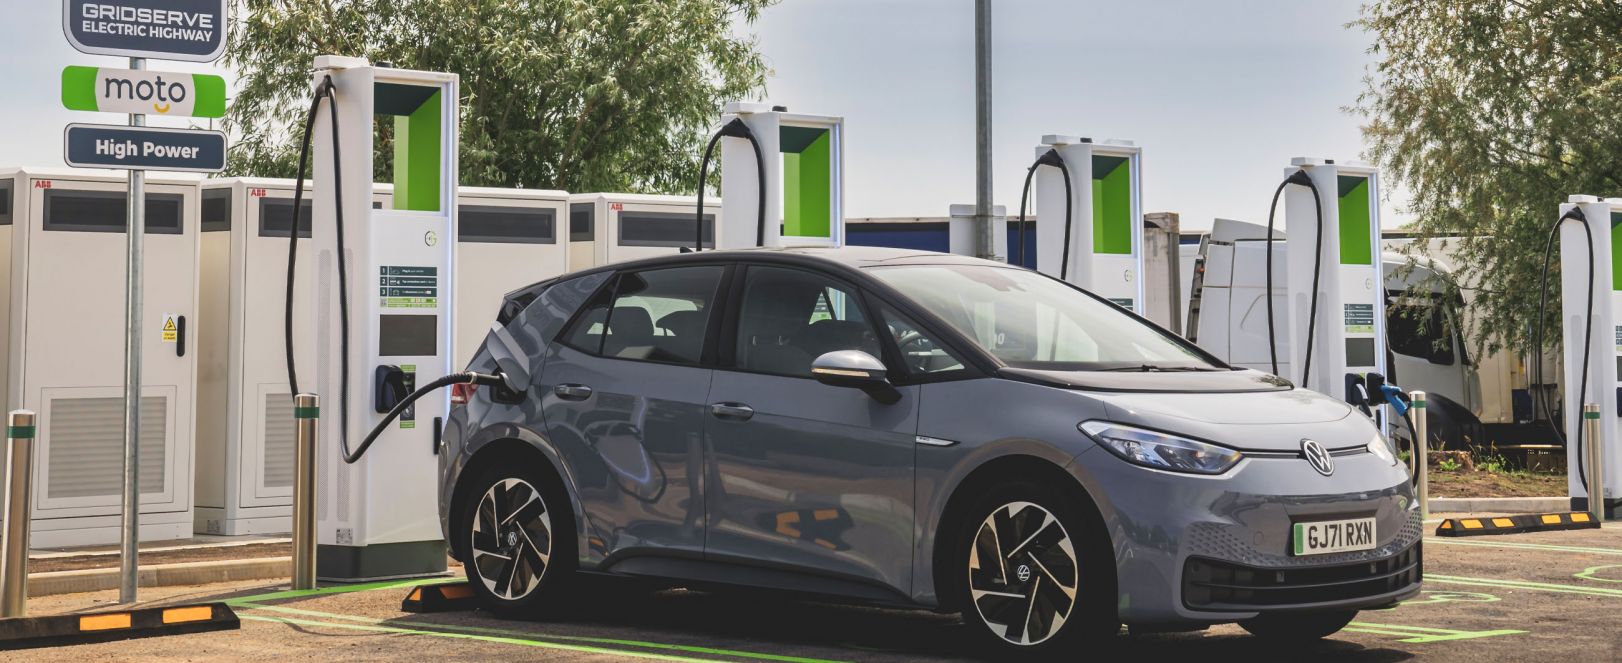 The best cheap electric cars you can lease in 2022 GRIDSERVE